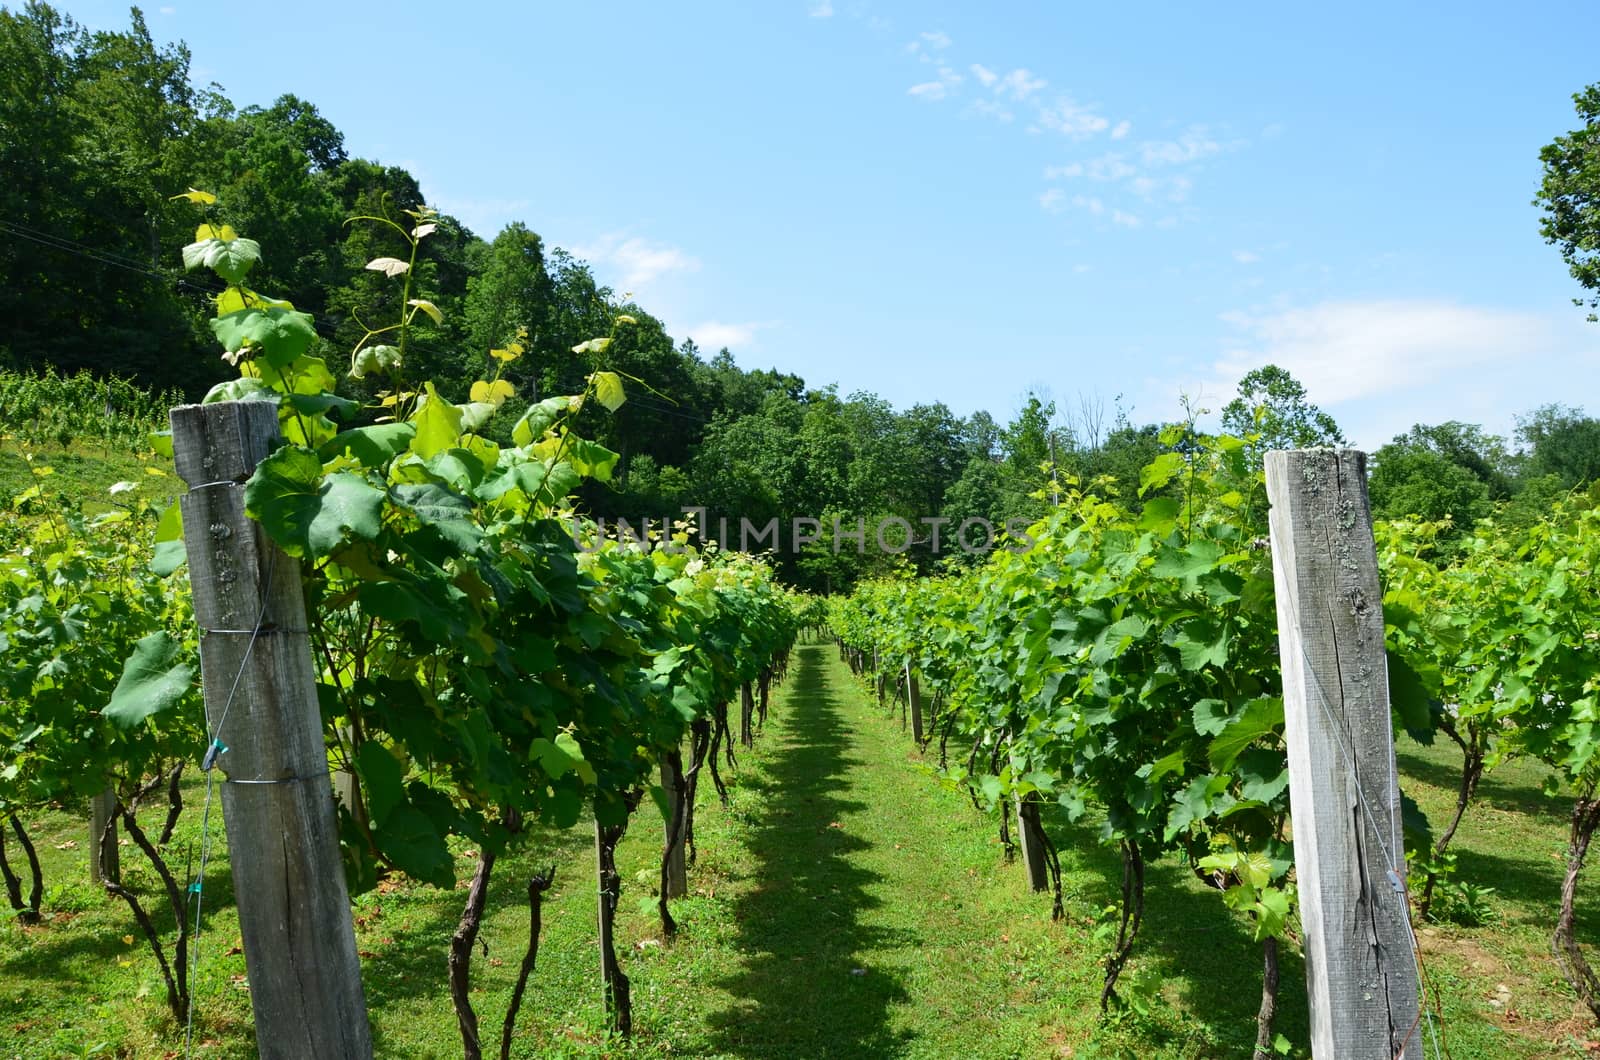 Grapes on the vine in rural North Carolina. Growing in the early summer.